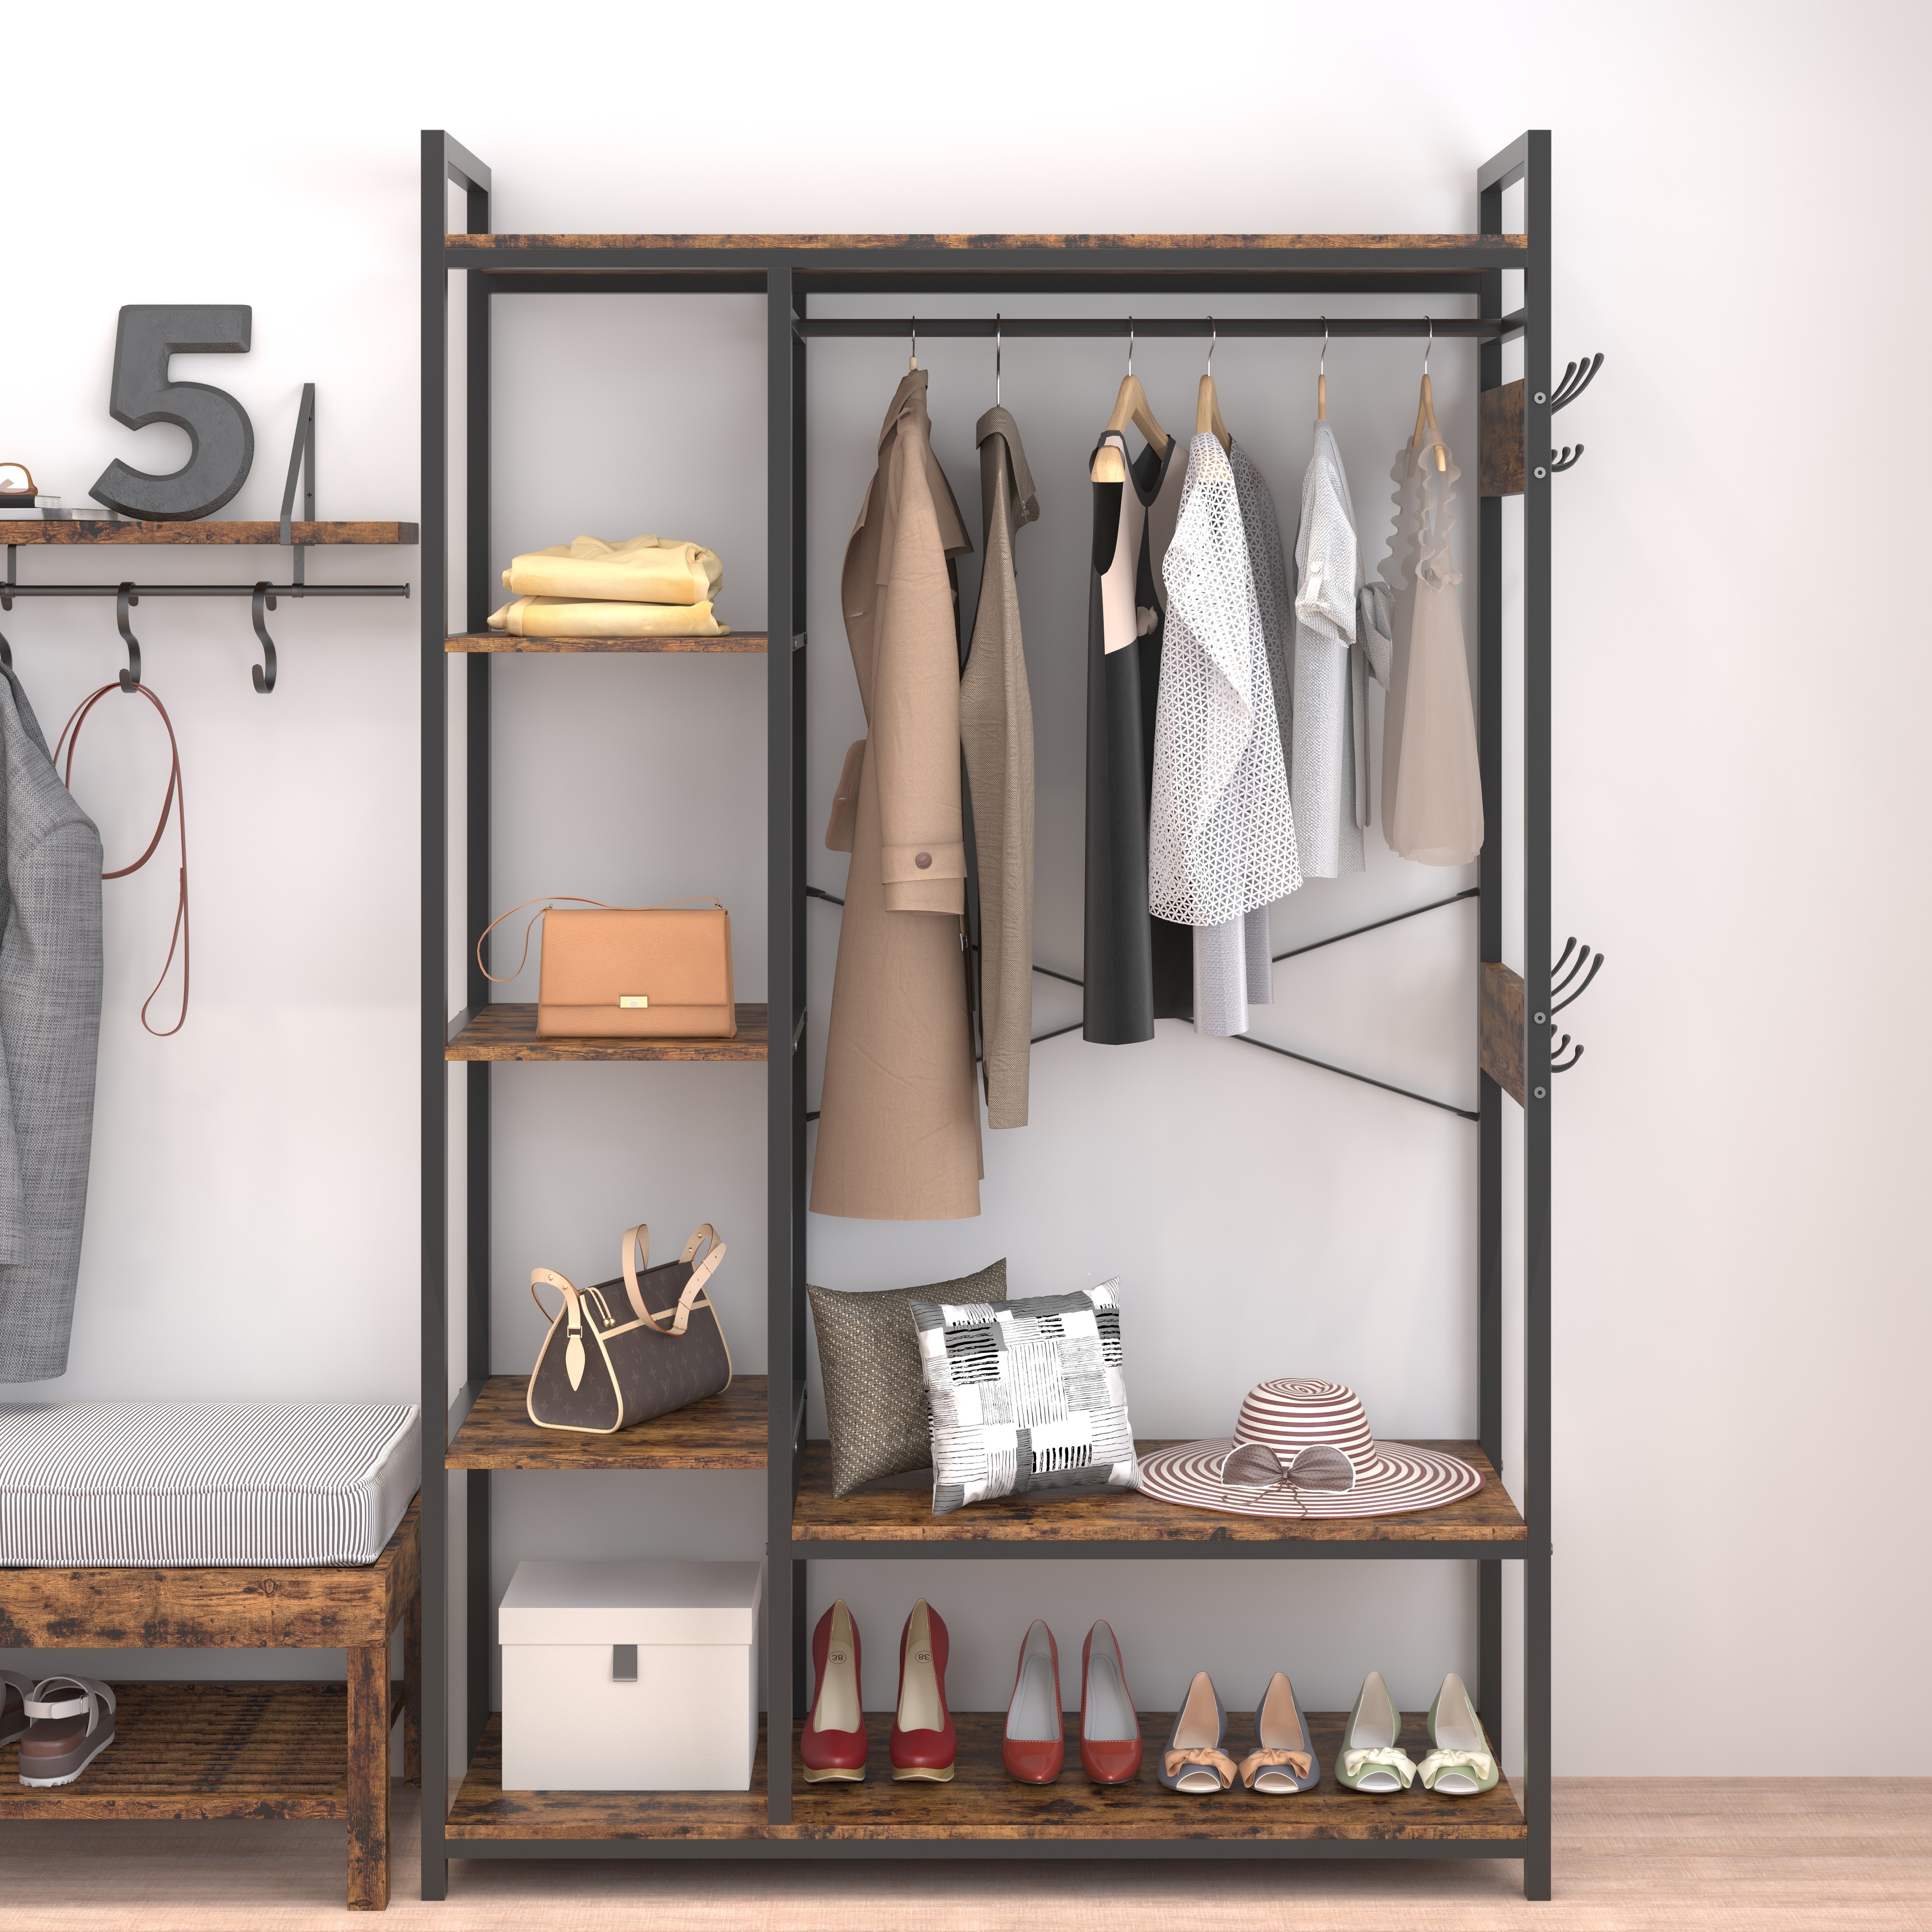 https://ak1.ostkcdn.com/images/products/is/images/direct/8d0aae30a2e00782471592df071035b6831ff51d/Free-Standing-Closet-Organizer-with-Storage-Box-%26-Side-Hook-Portable-Garment-Rack-with-6-Shelves-and-Hanging-Rod.jpg